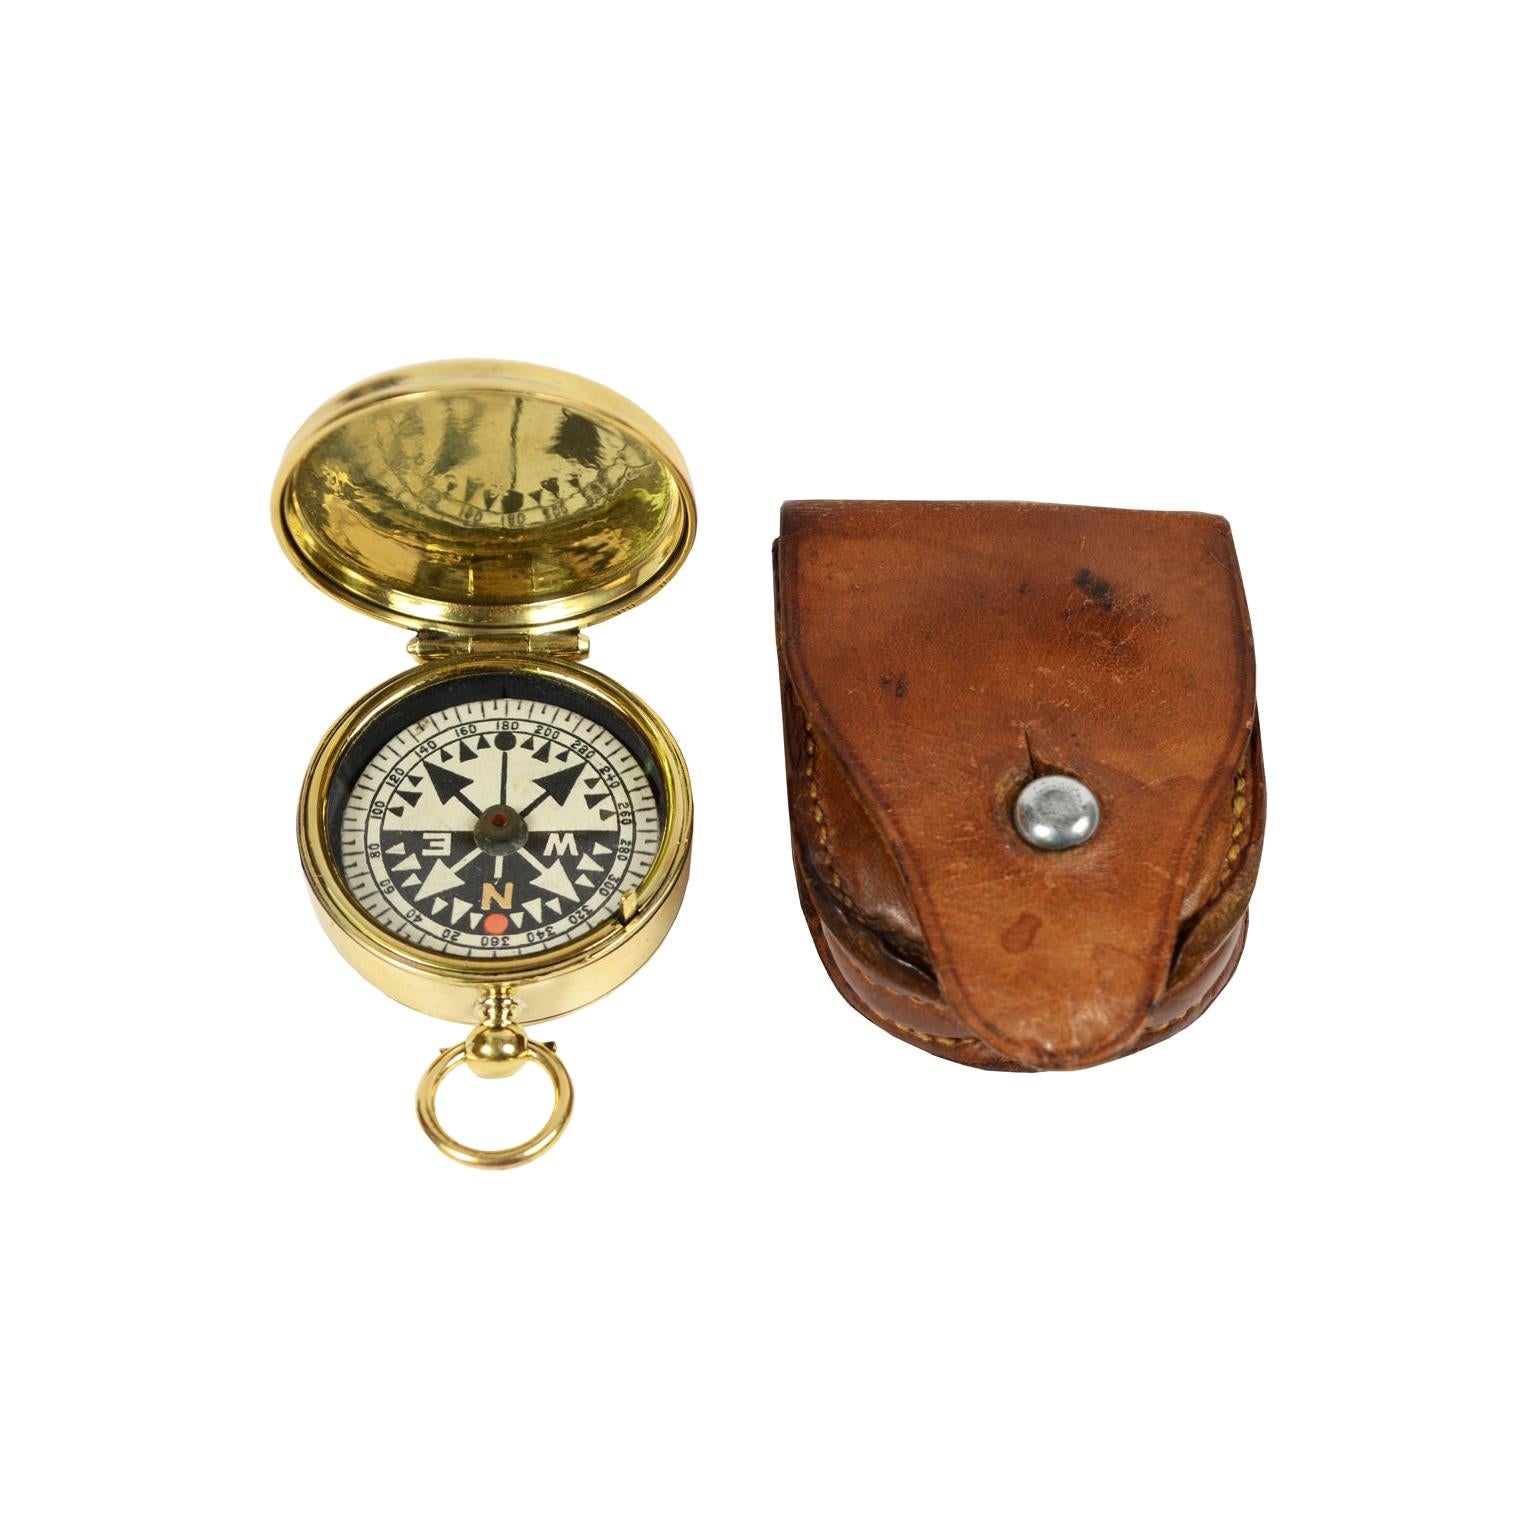 Brass Compass Made in England in the Early 1900s with its Leather Case